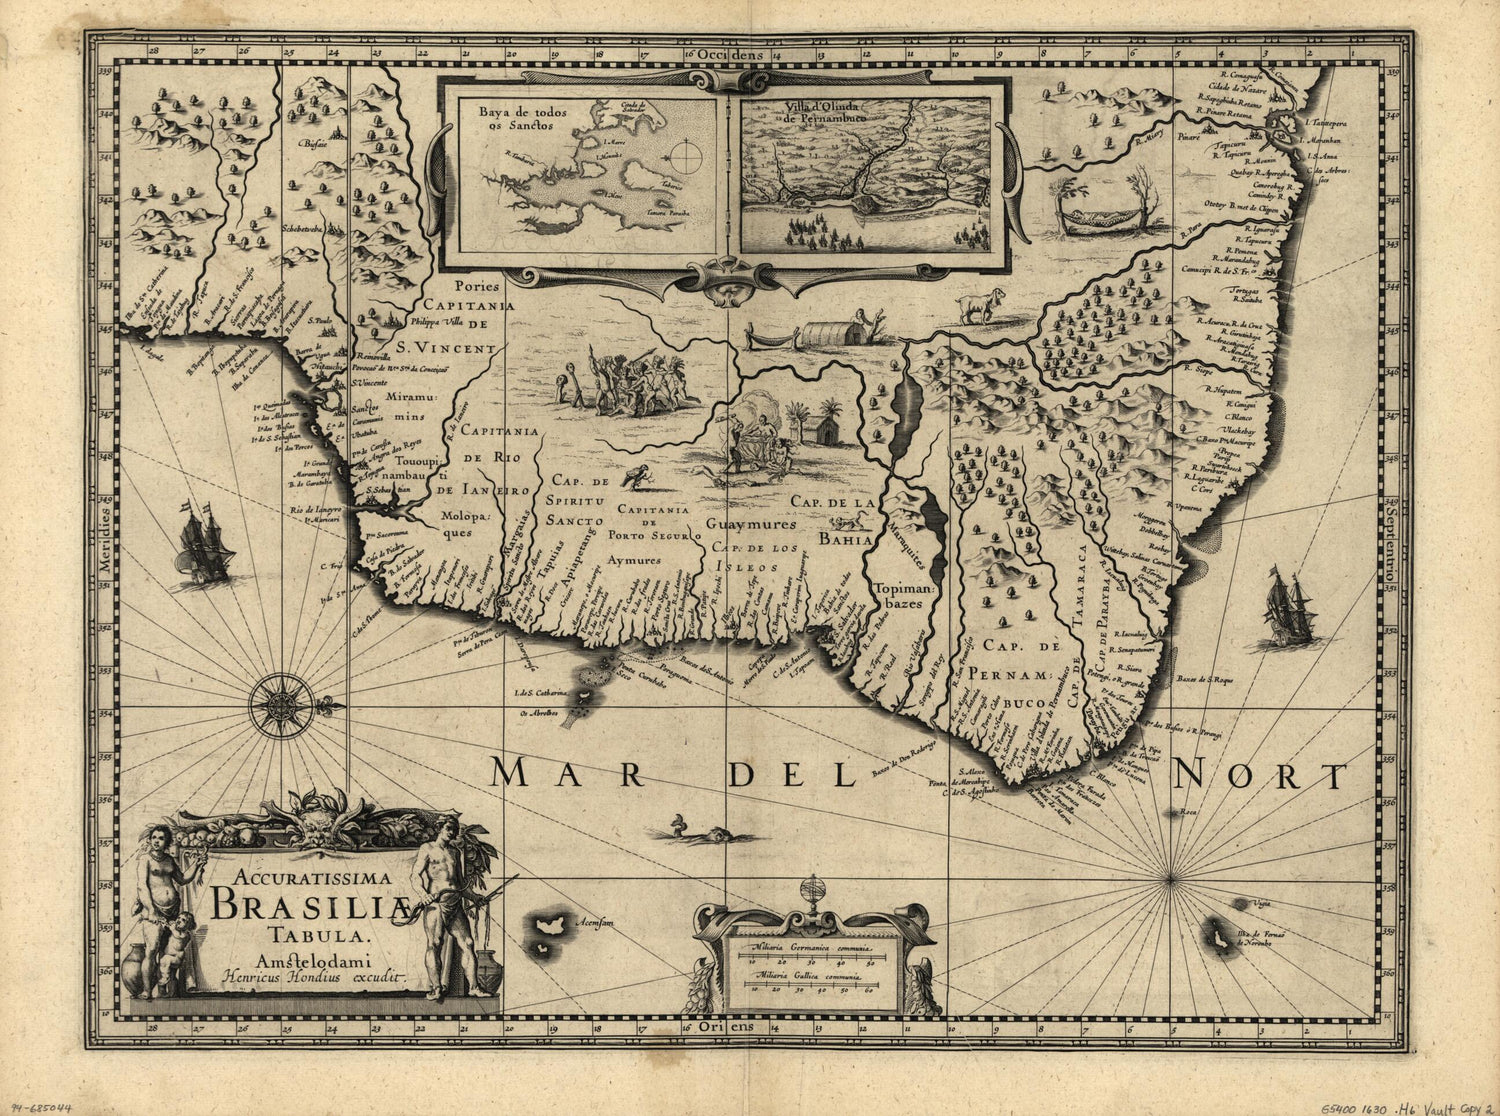 This old map of Accuratissima Brasiliæ Tabula from 1630 was created by Hendrik Hondius in 1630